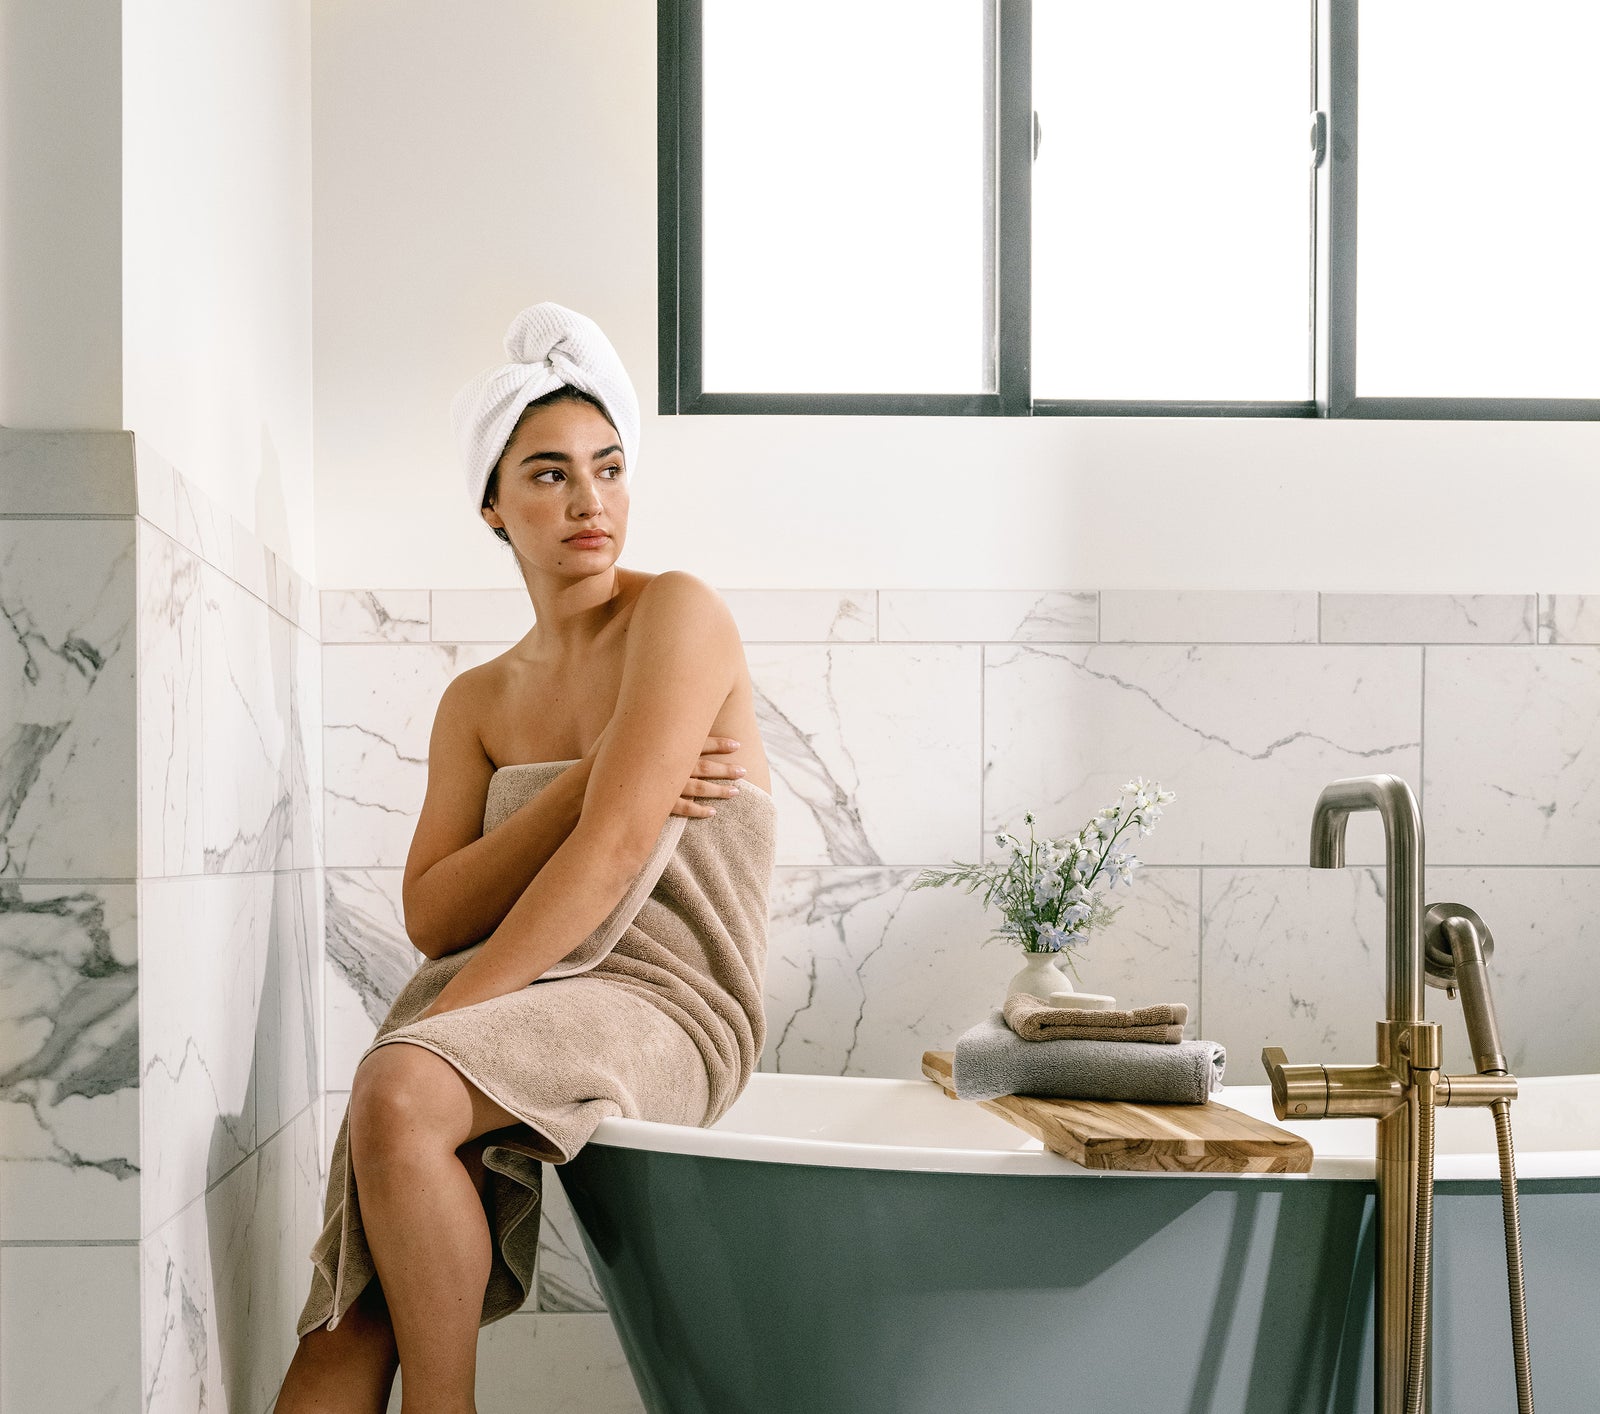 Premium Plush Bath Towel in the color Sand. Photo of Sand Premium Plush Bath Towel taken in a bathroom with a white tile backsplash. There is a brunette woman holding the towel close to her body as she sits on the bathtub. 